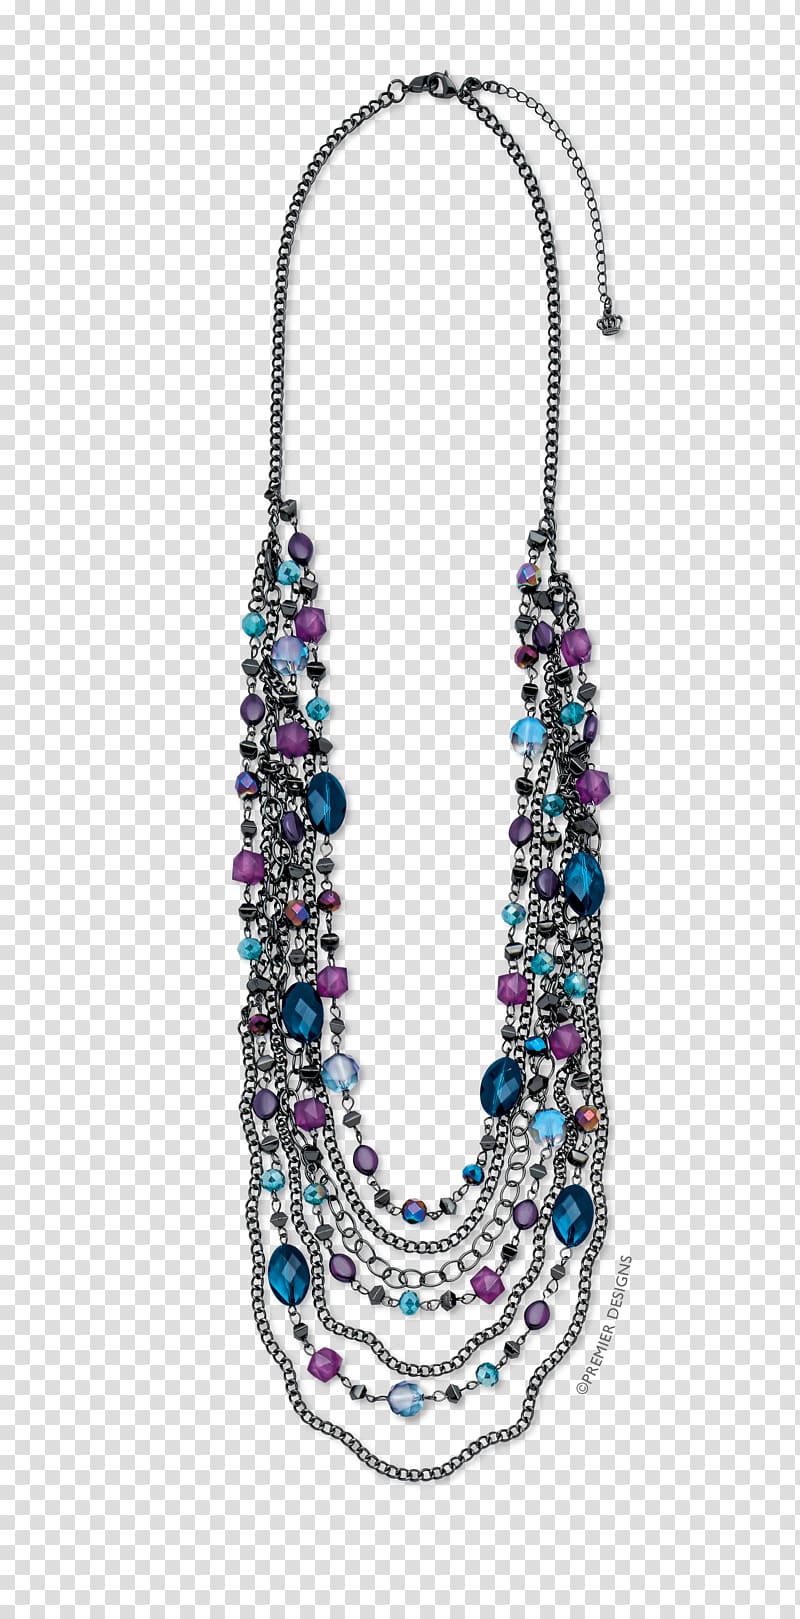 Necklace Turquoise Earring Premier Designs, Inc. Jewellery, necklace transparent background PNG clipart